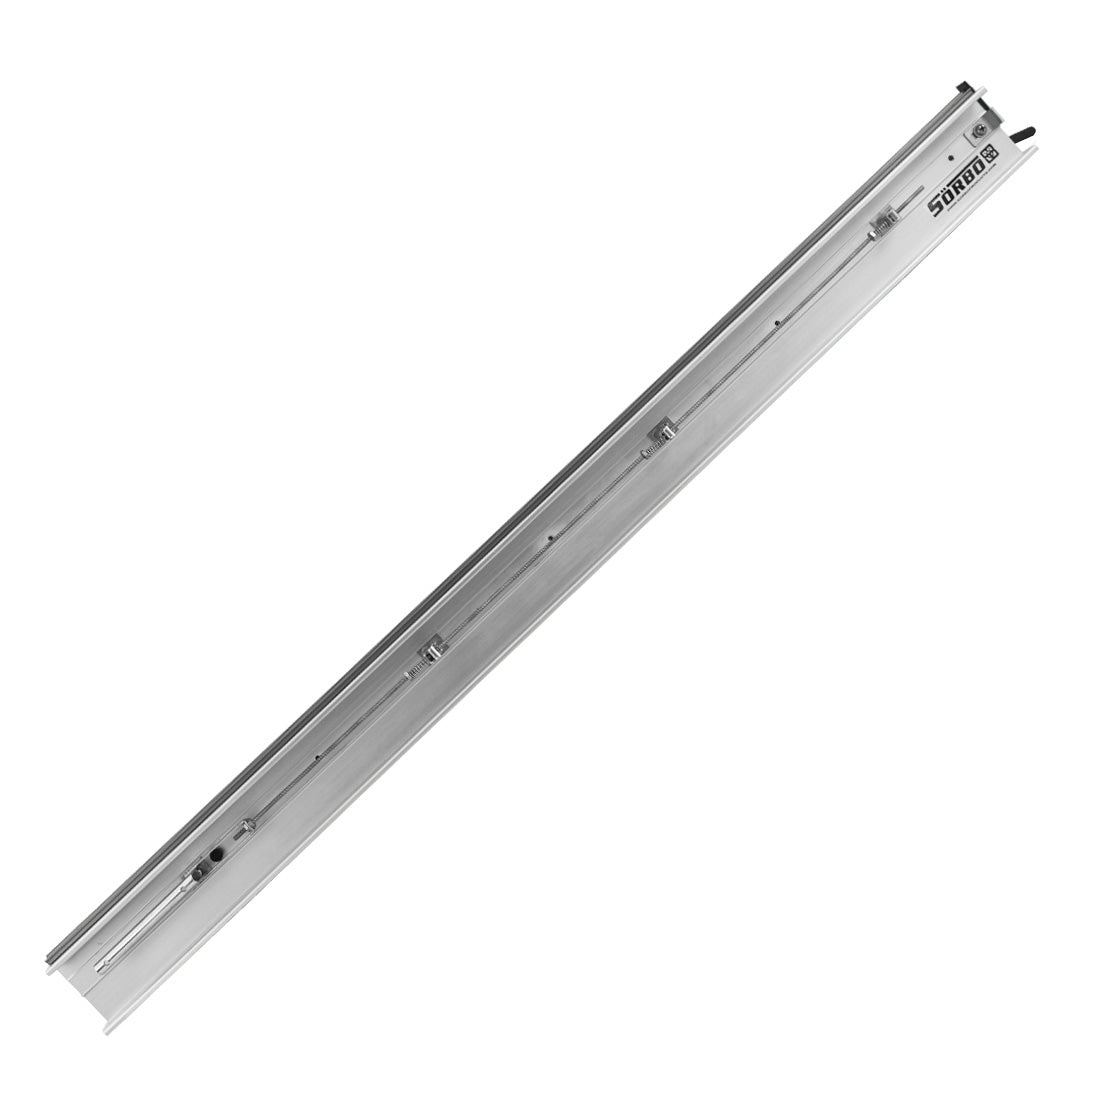 Stainless Steel Window Squeegee, for Window Cleaning at Rs 225